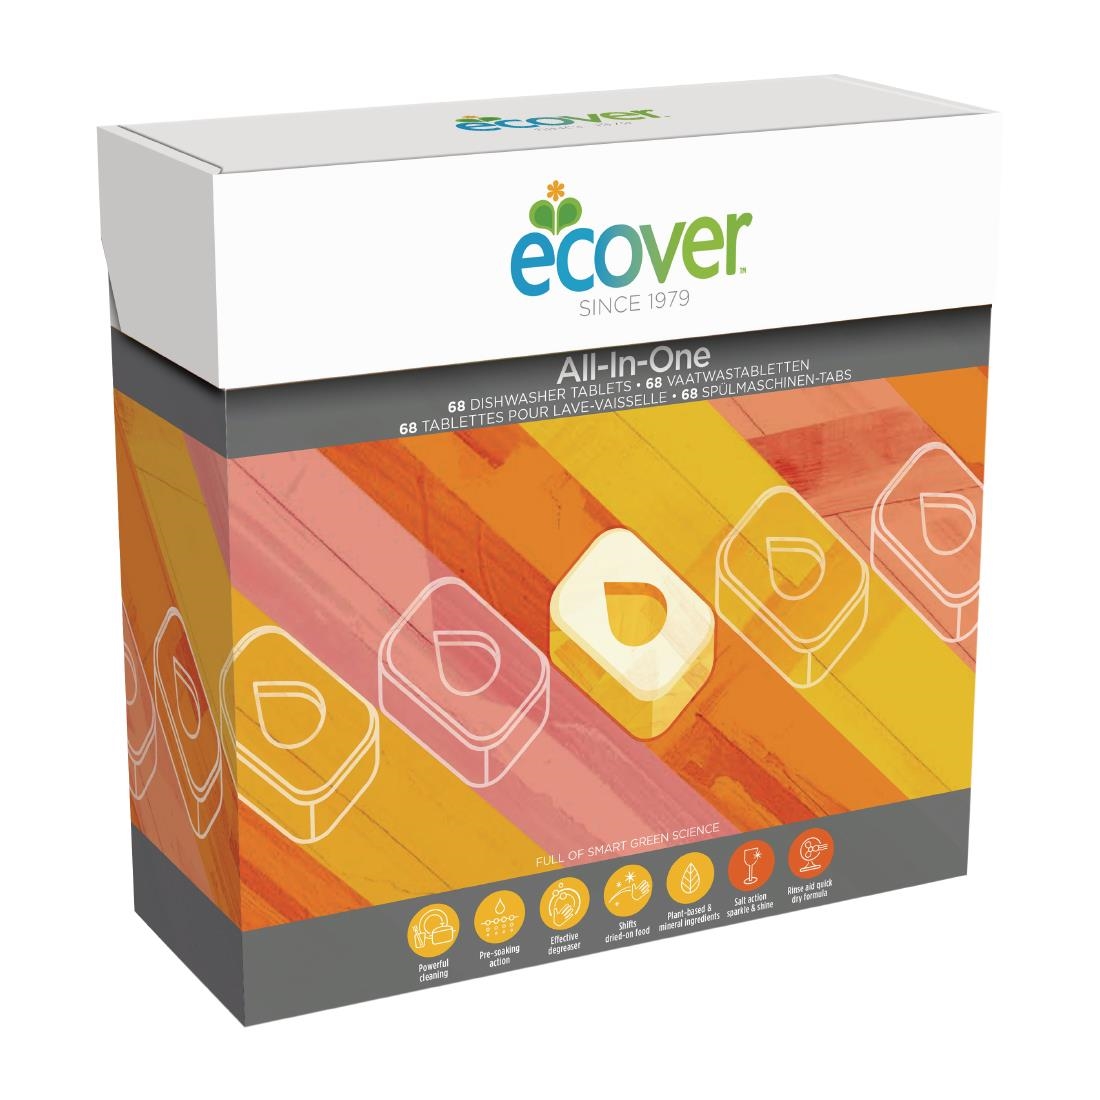 Ecover All-in-One Dishwasher Tablets (5 x 68 Pack)